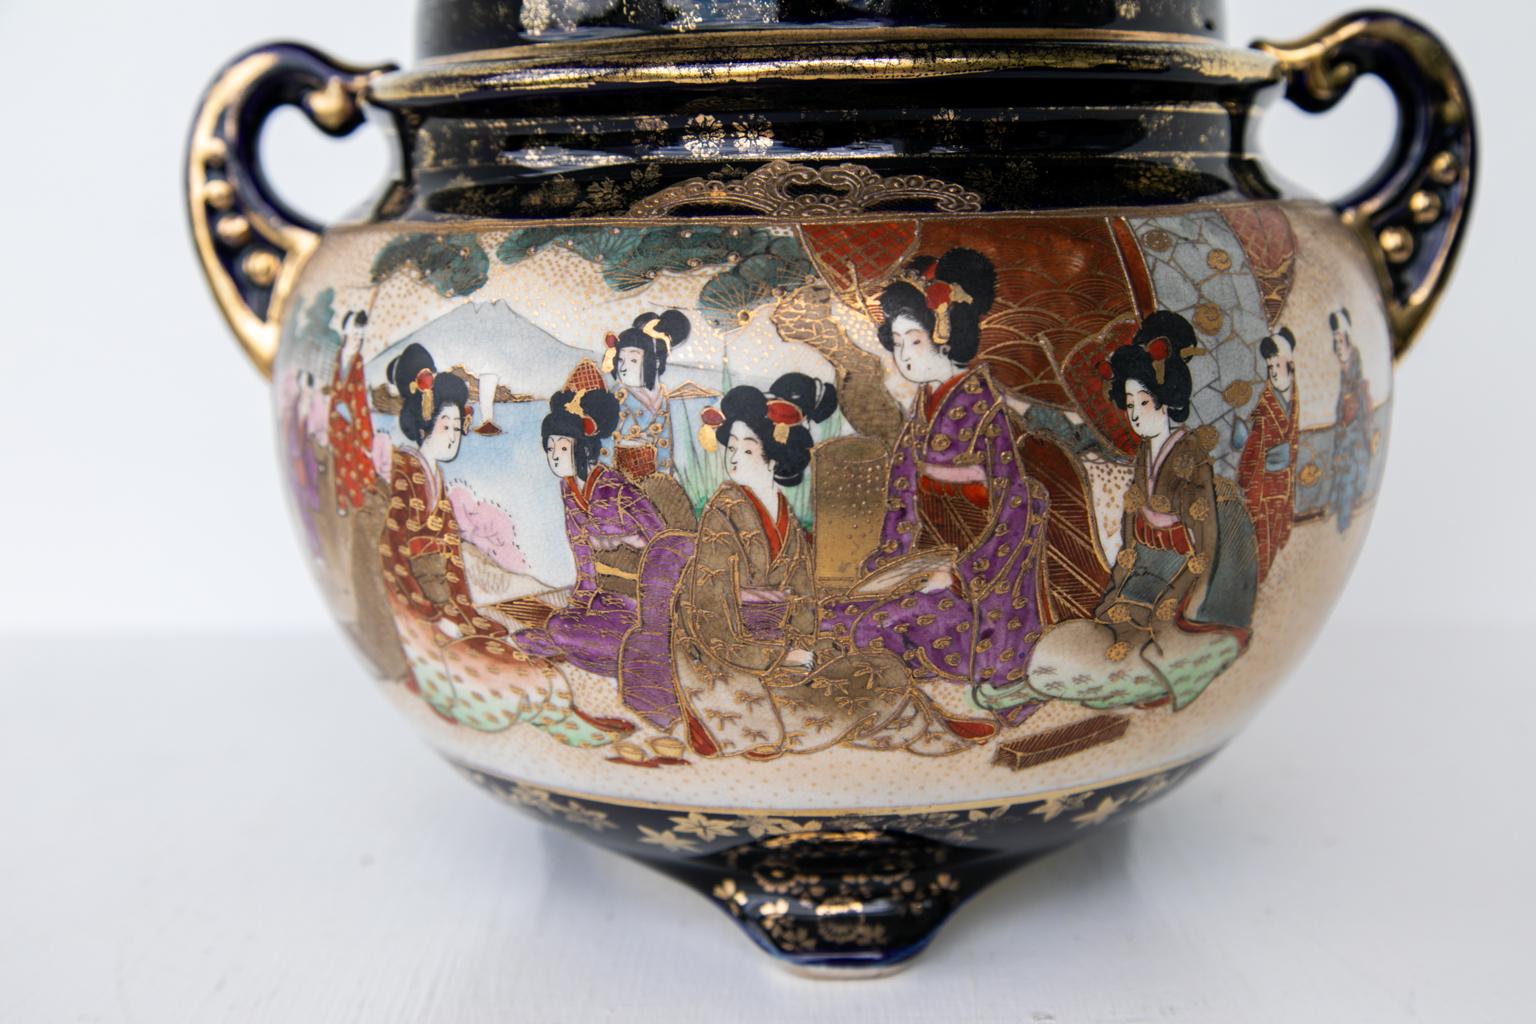 Japanese satsuma covered tureen, depicting figures in a garden and a courtyard. The background is cobalt blue with gilt highlights all-over. The lid has heart shaped cutout vents. There is some wear to the gilding.
        